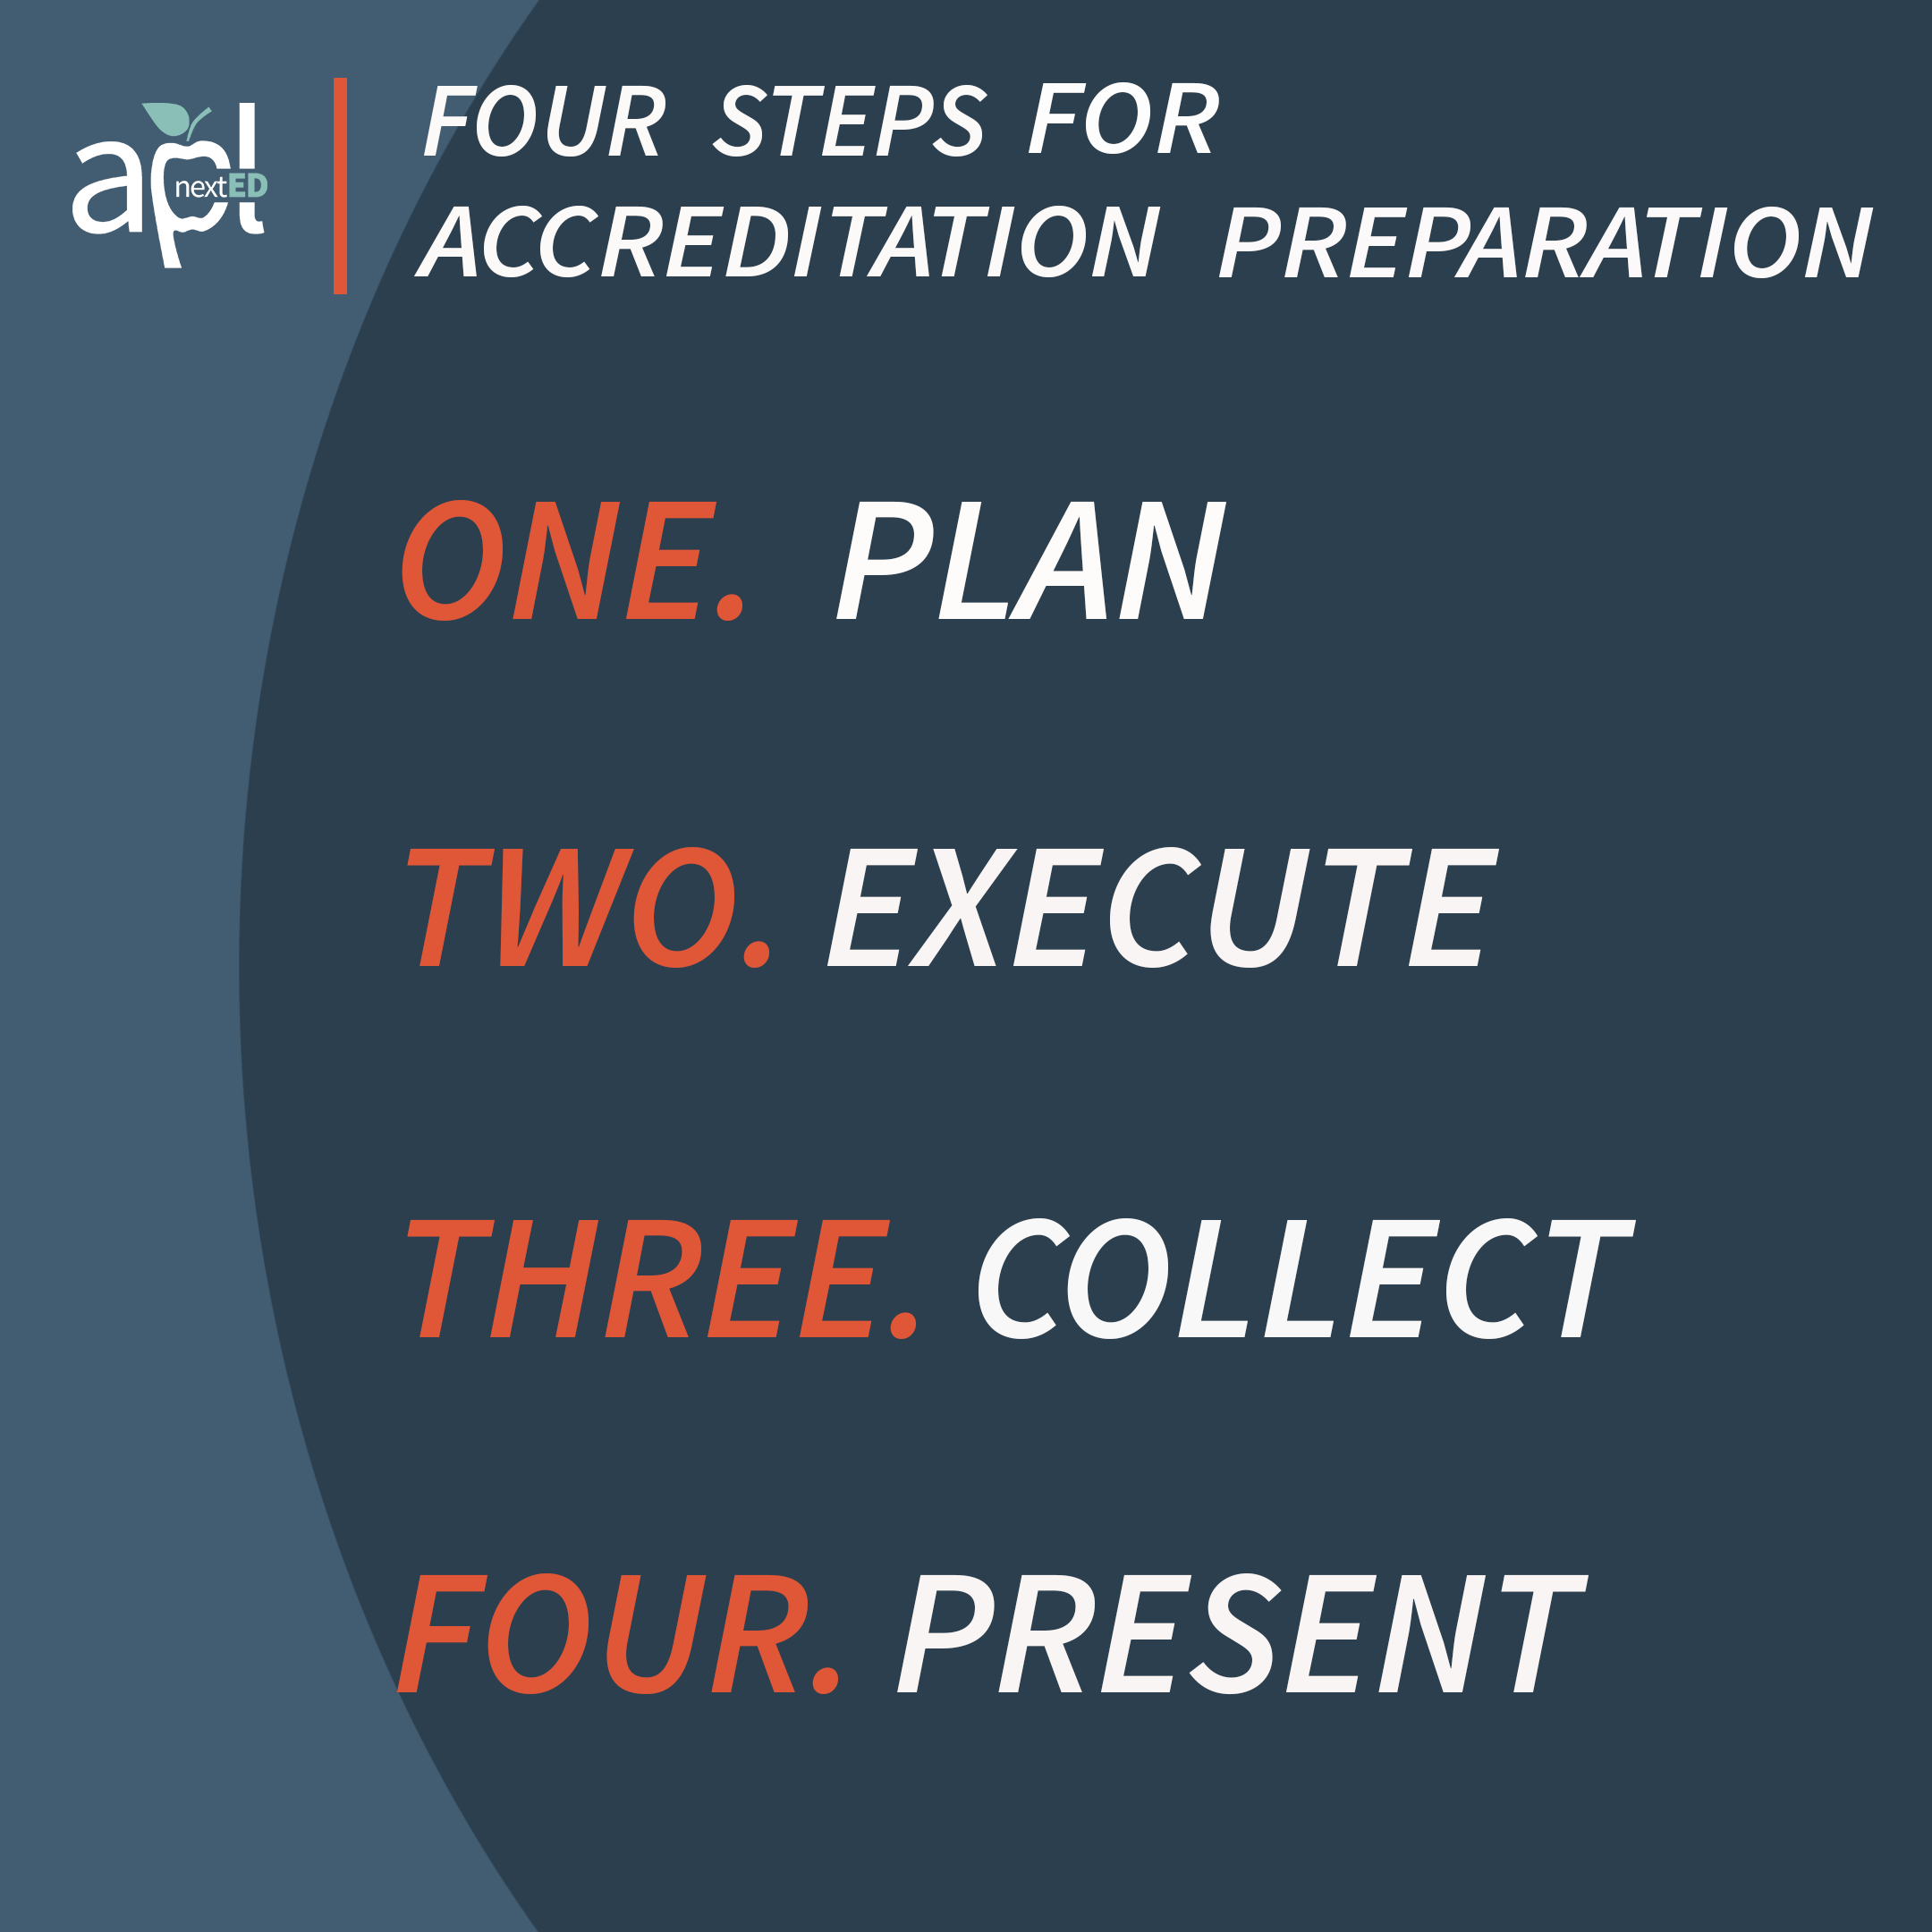 Four Steps for Accreditation Preparation One. PLAN. Two. EXECUTE. Three. COLLECT. Four. PRESENT.  